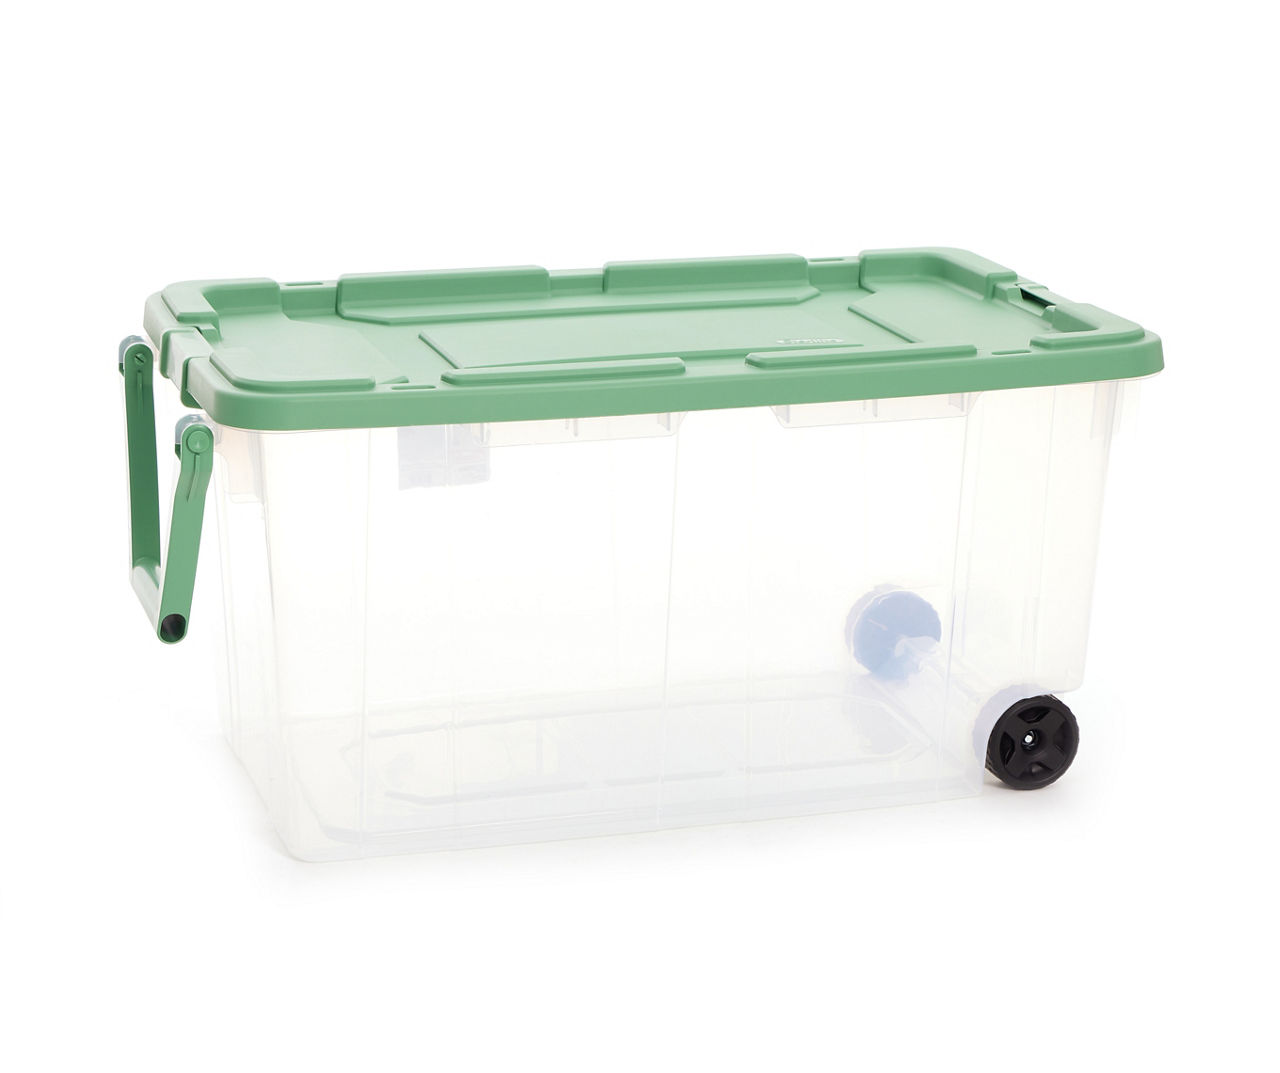 HART 160 Quart Latching Plastic Storage Bin Container, Clear, Set of 3